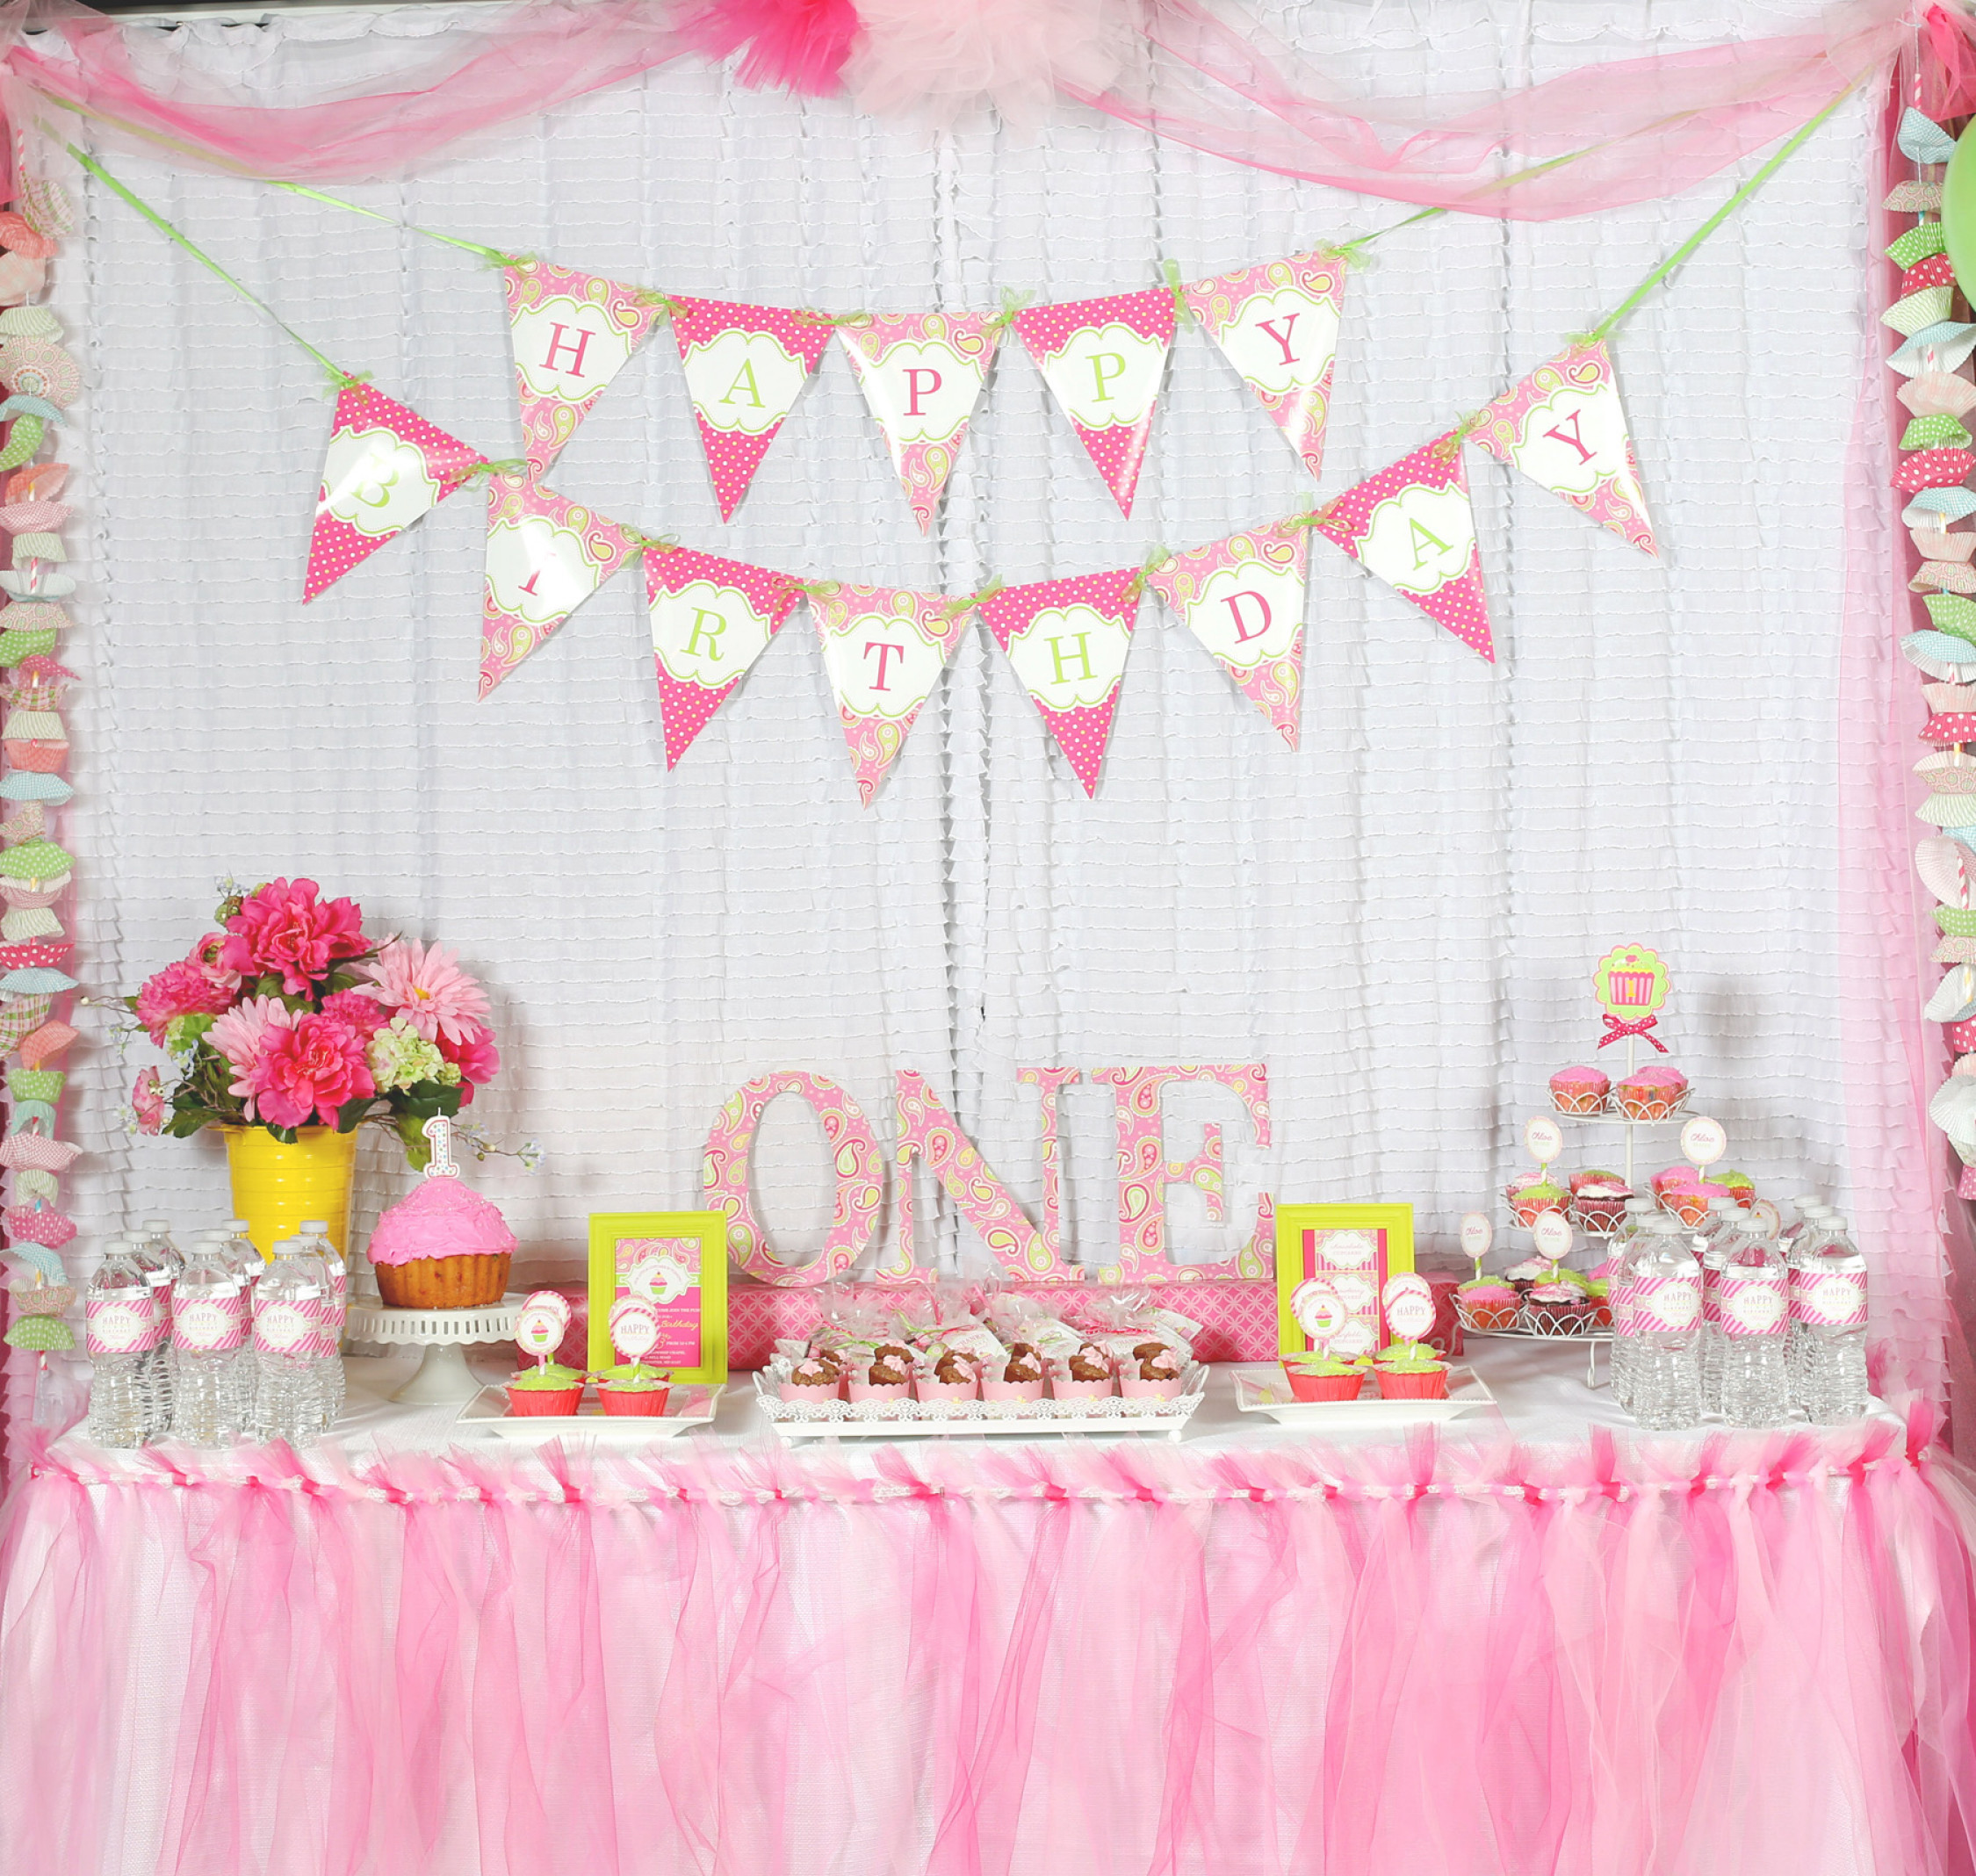 Baby First Birthday Decoration Ideas
 A Cupcake Themed 1st Birthday party with Paisley and Polka